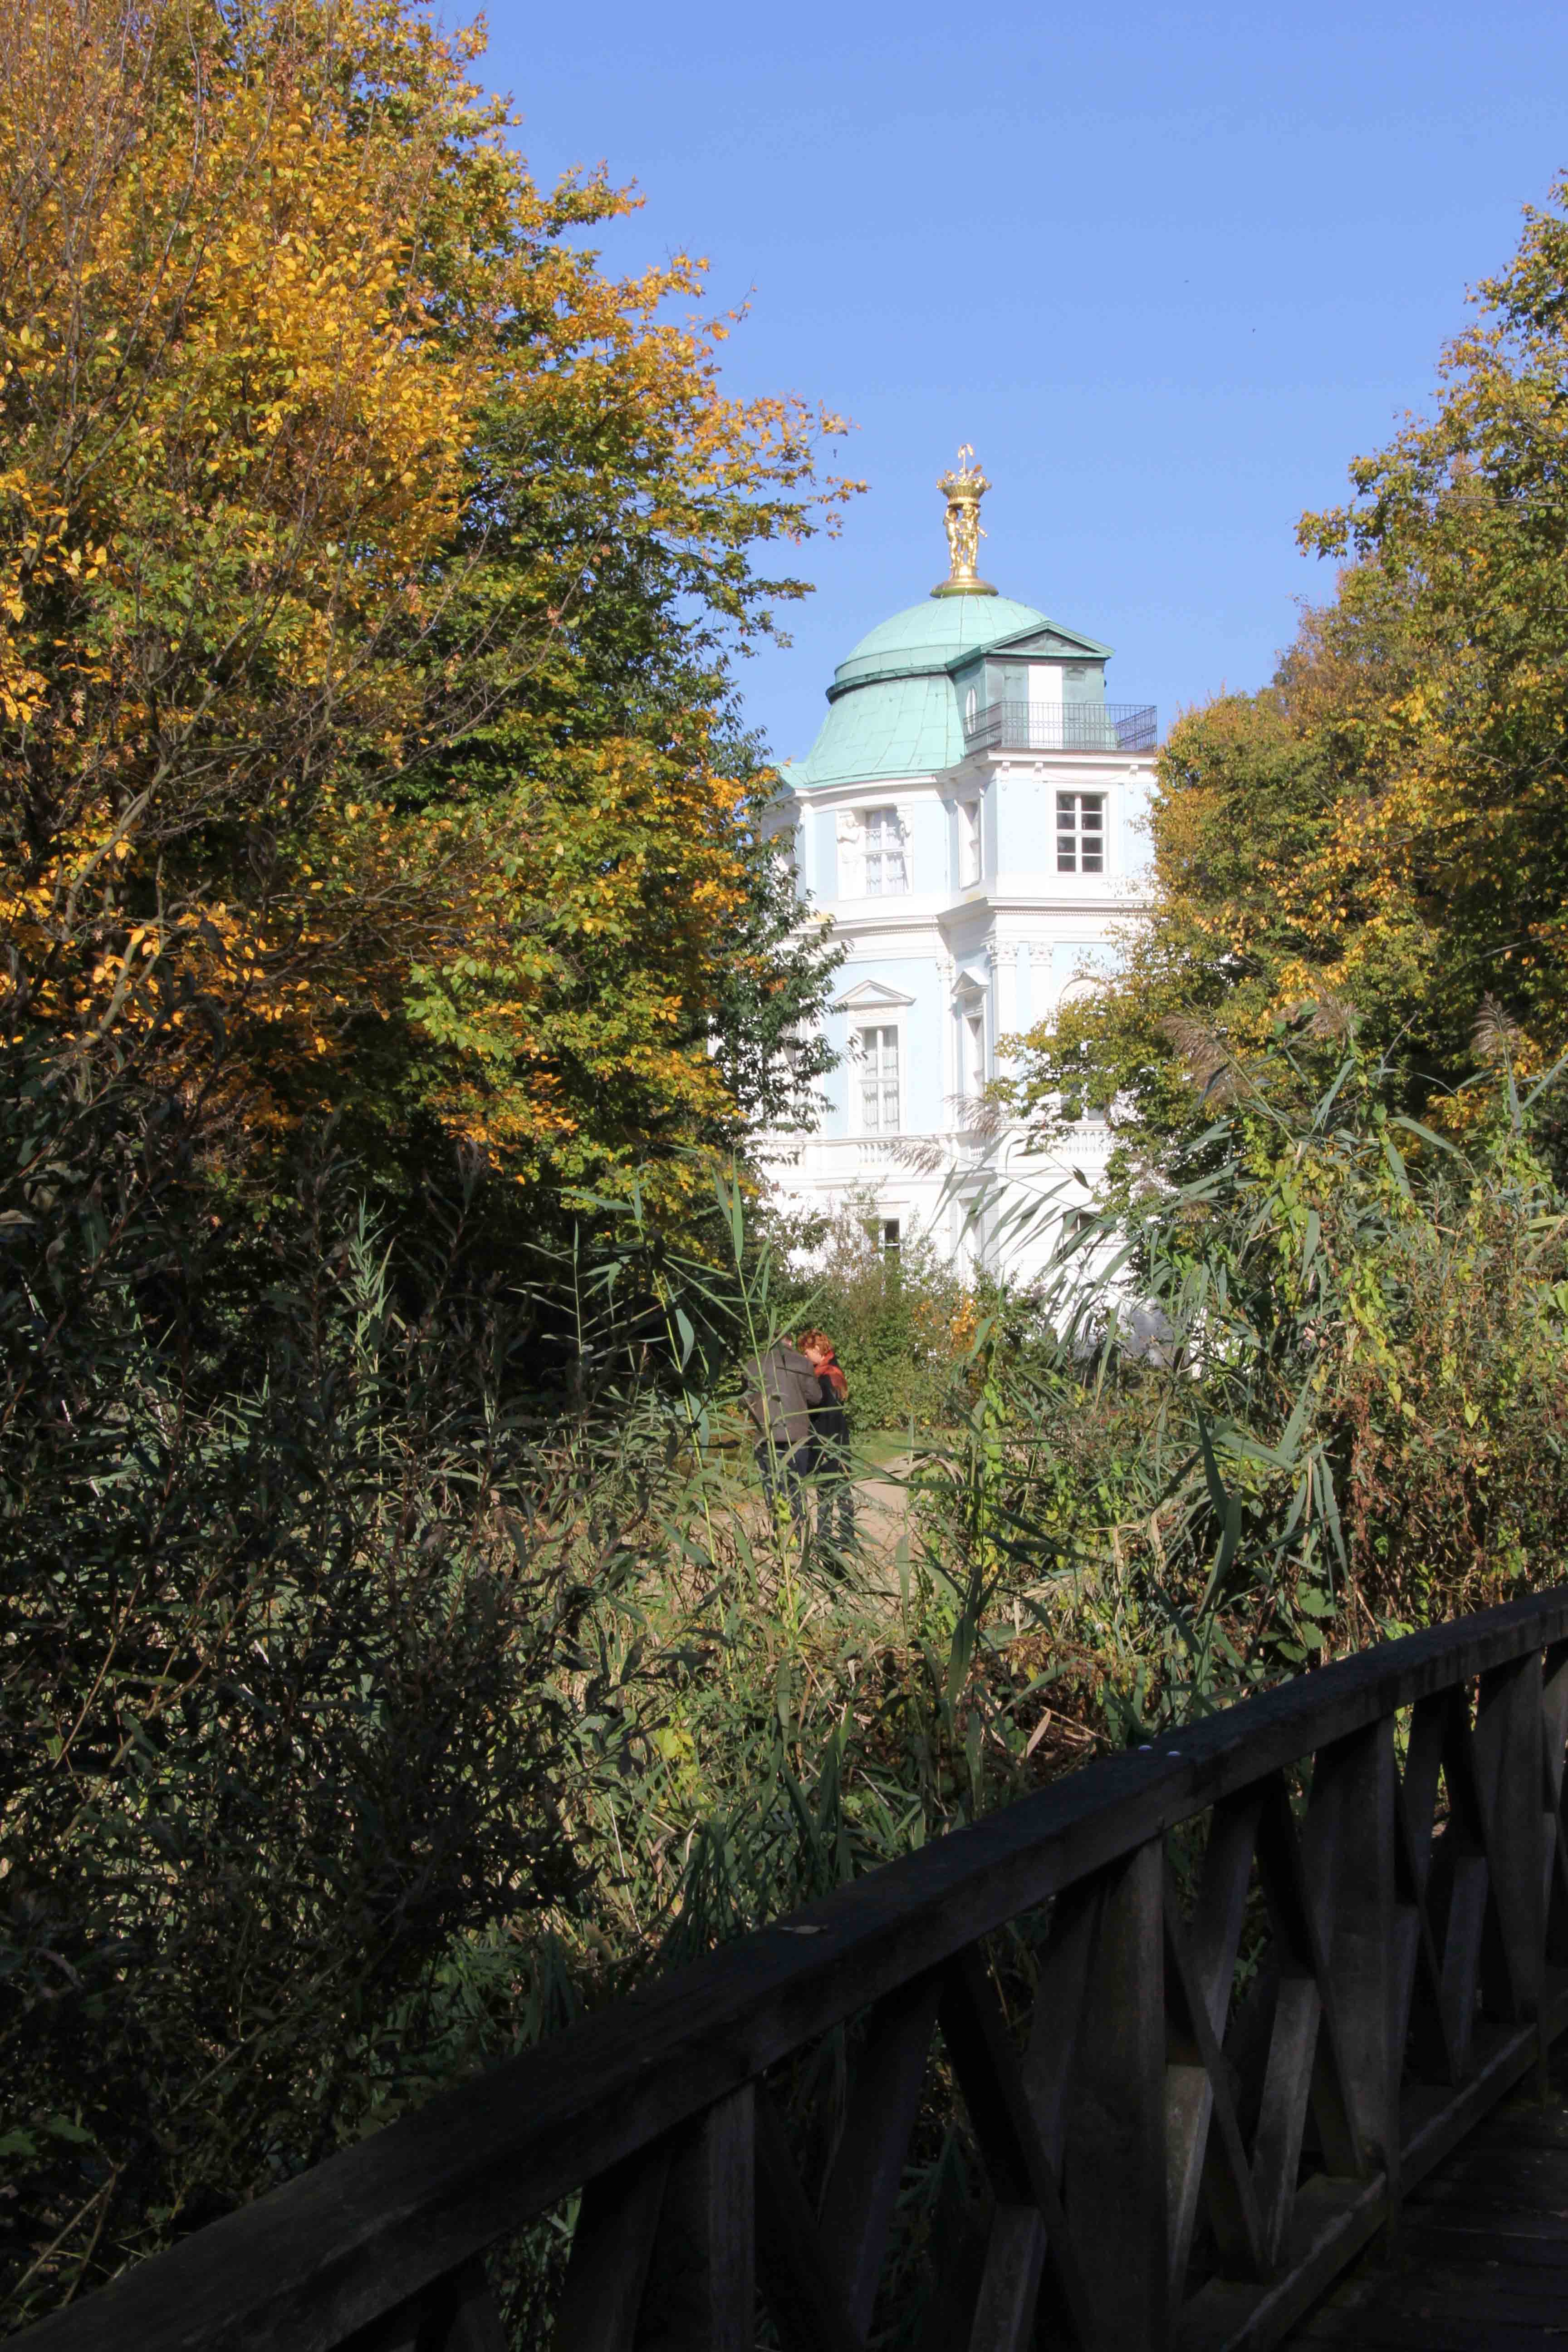 The Belvedere, which houses the Berlin Porcelain Museum, seen through trees in the Palace Gardens of Schloss Charlottenburg in Berlin